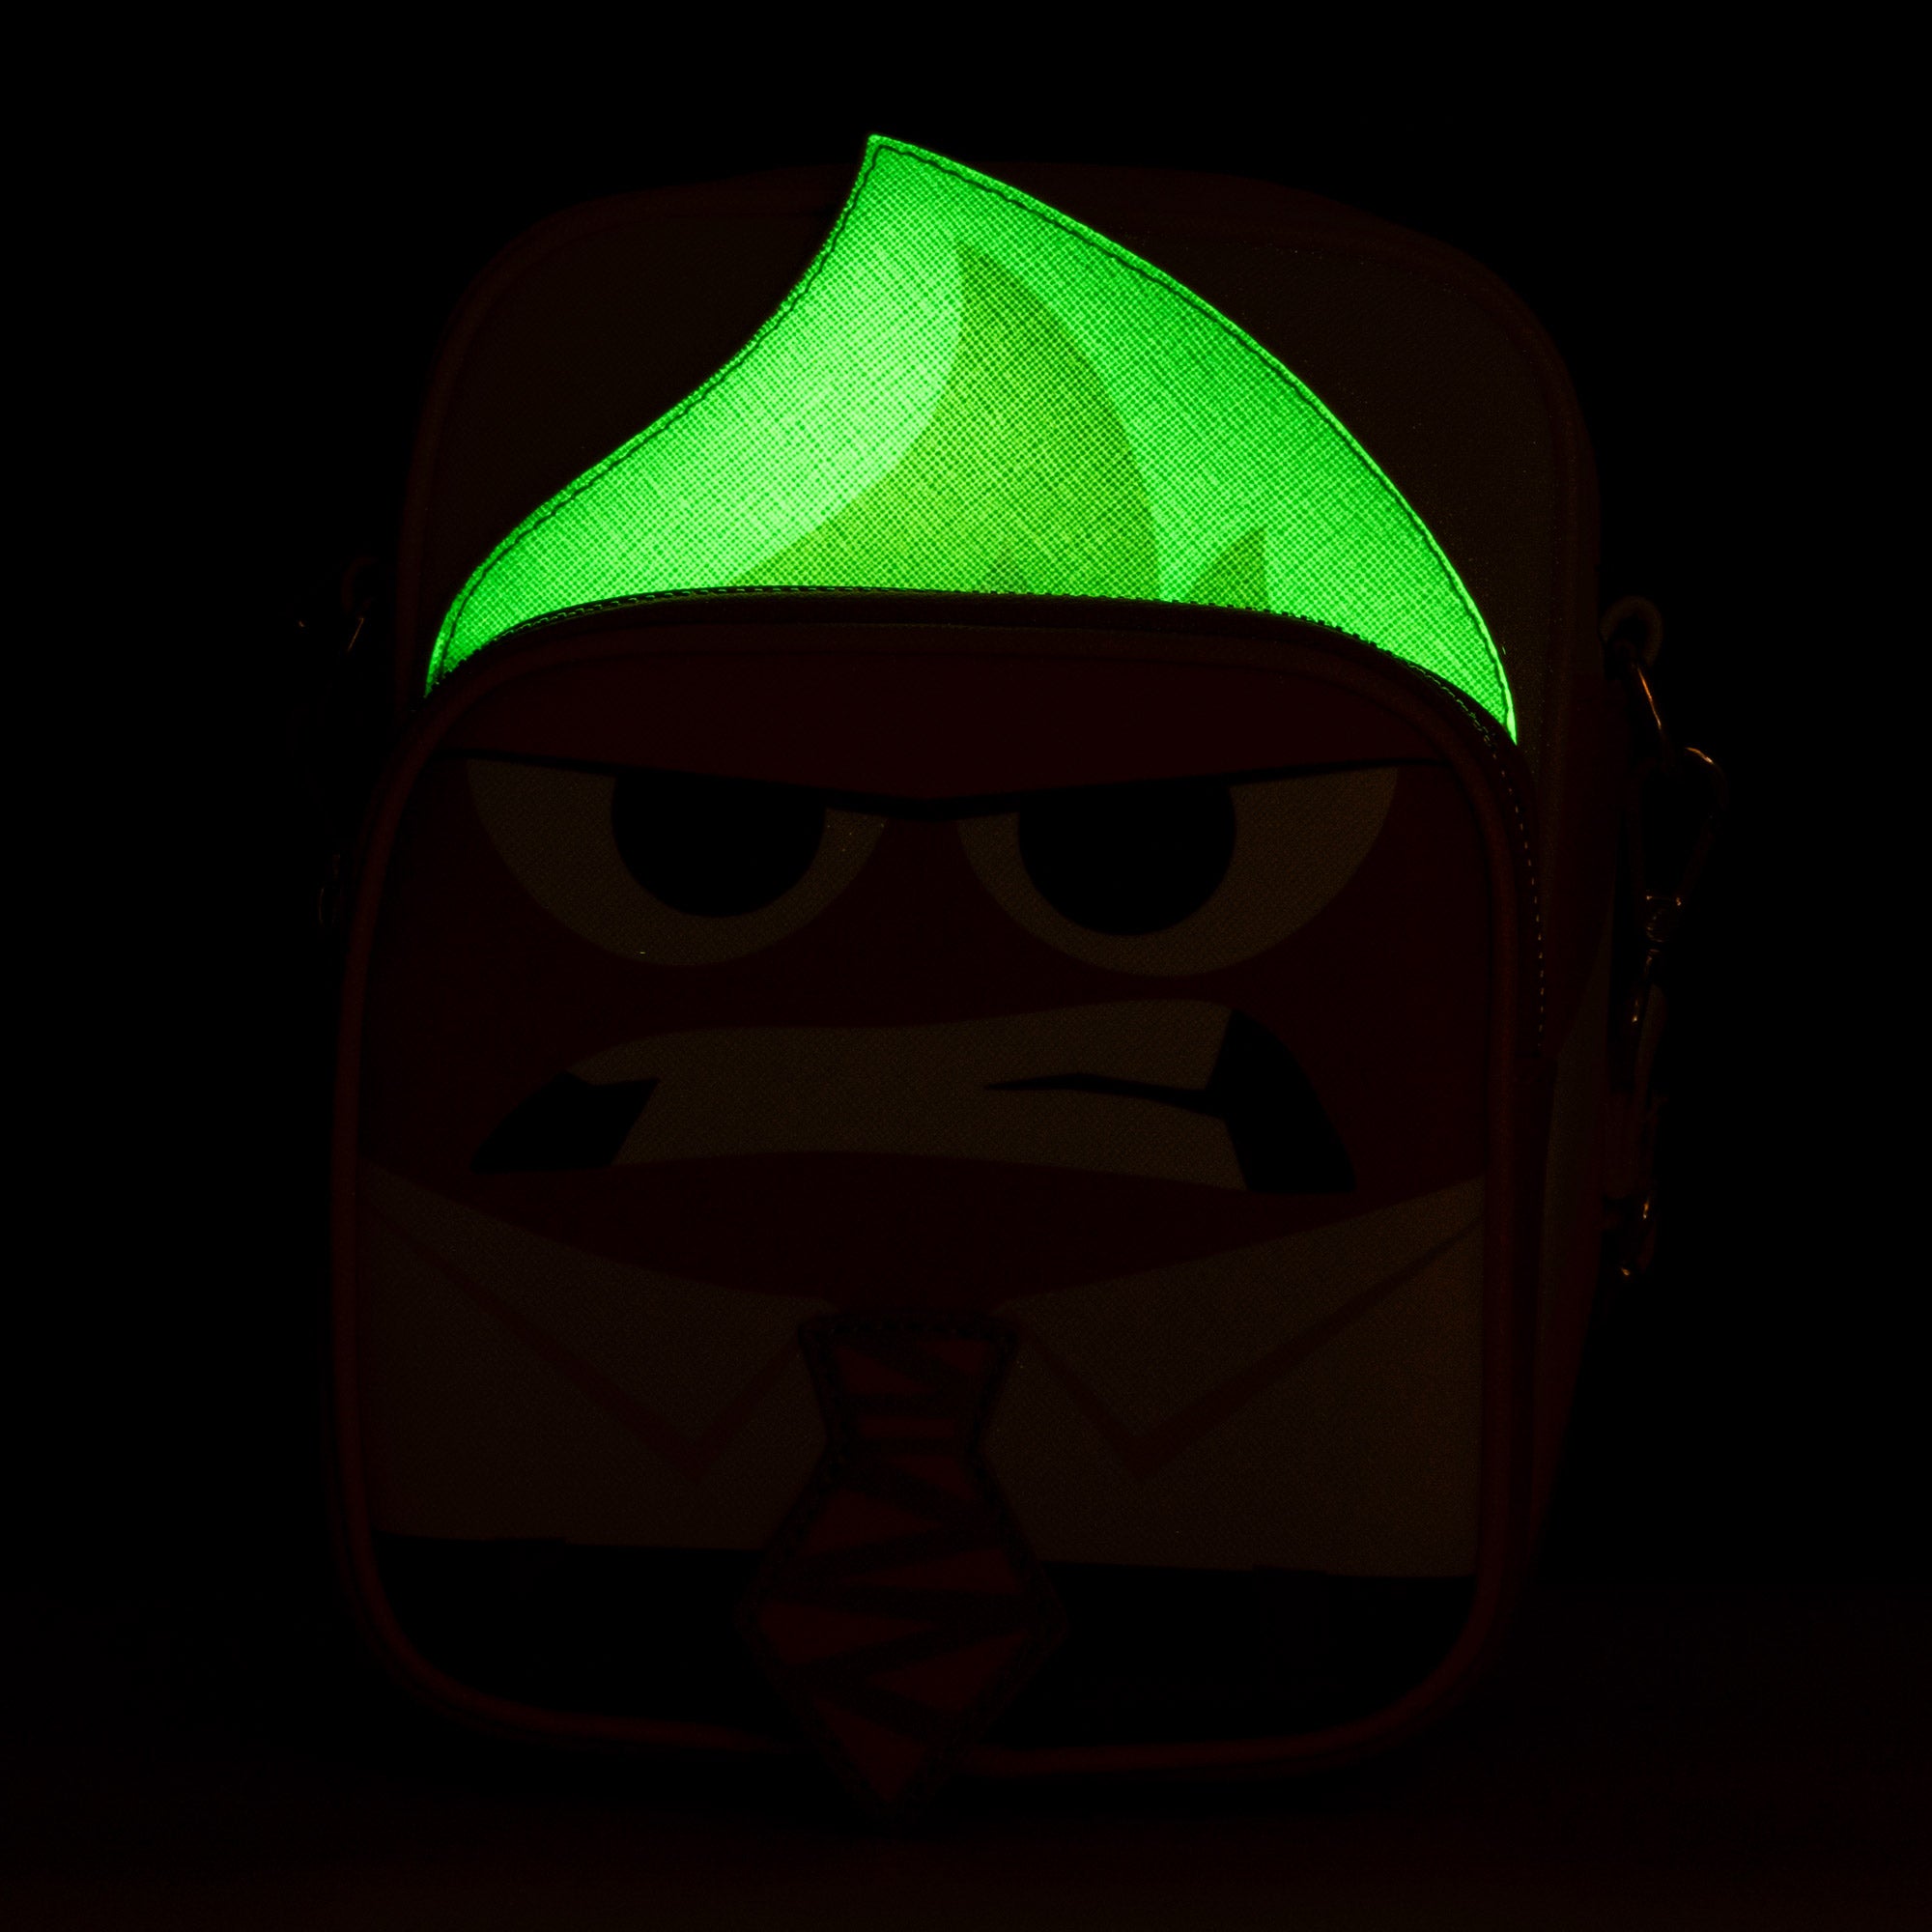 Loungefly x Pixar Inside Out Anger Cosplay Passport Bag